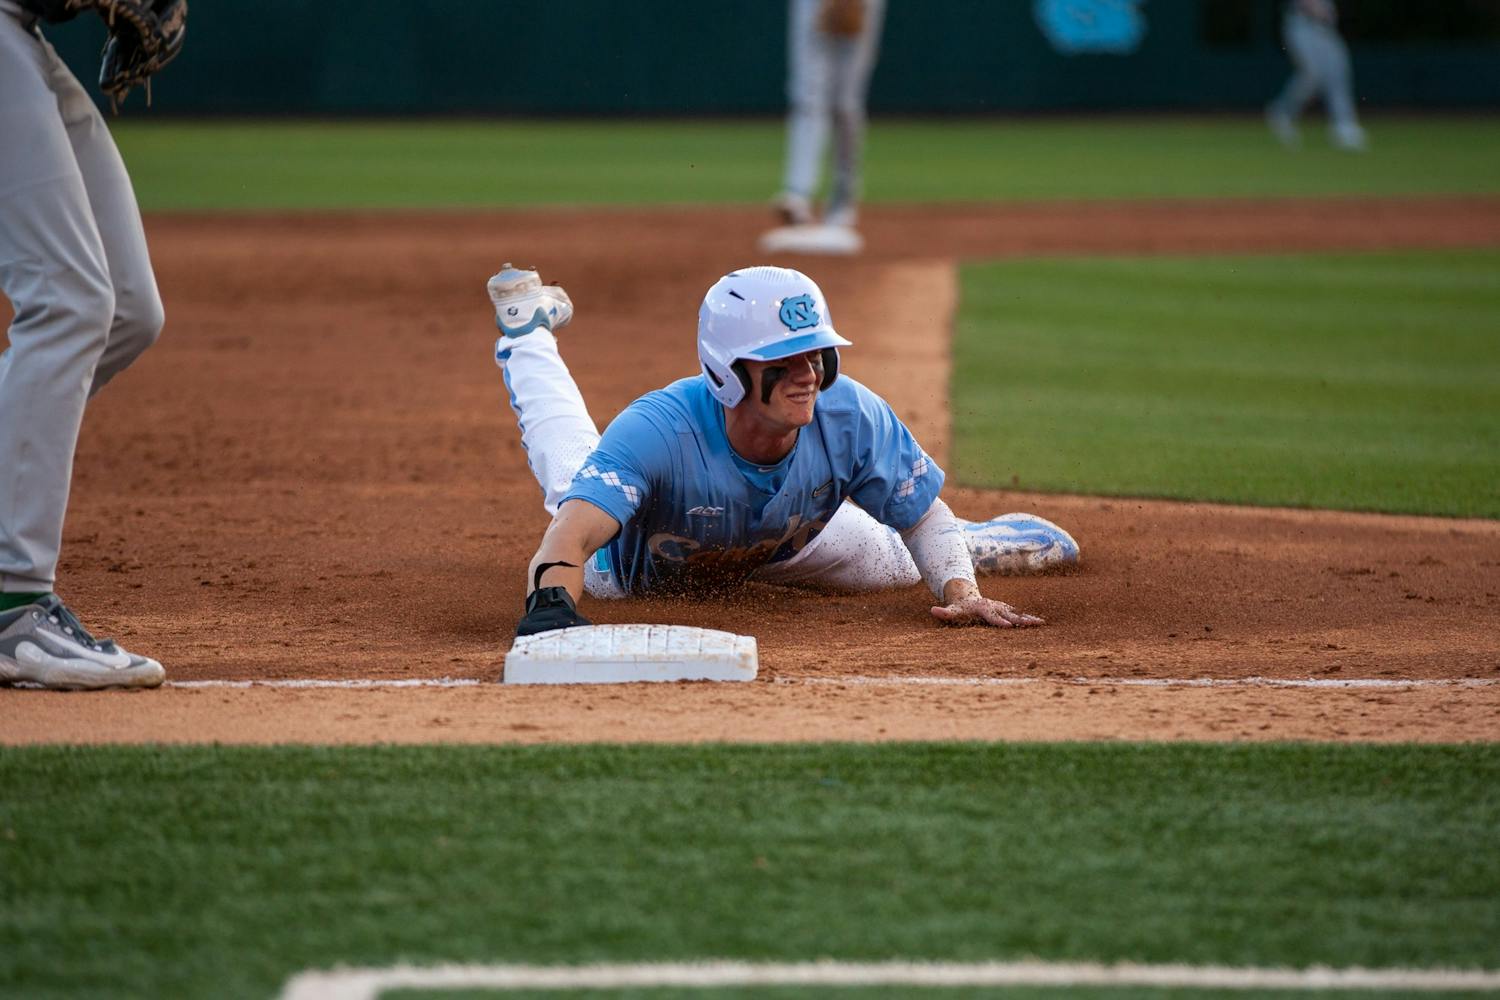 UNC Baseball Wins Sunday at Virginia Tech to Avoid Getting Swept 